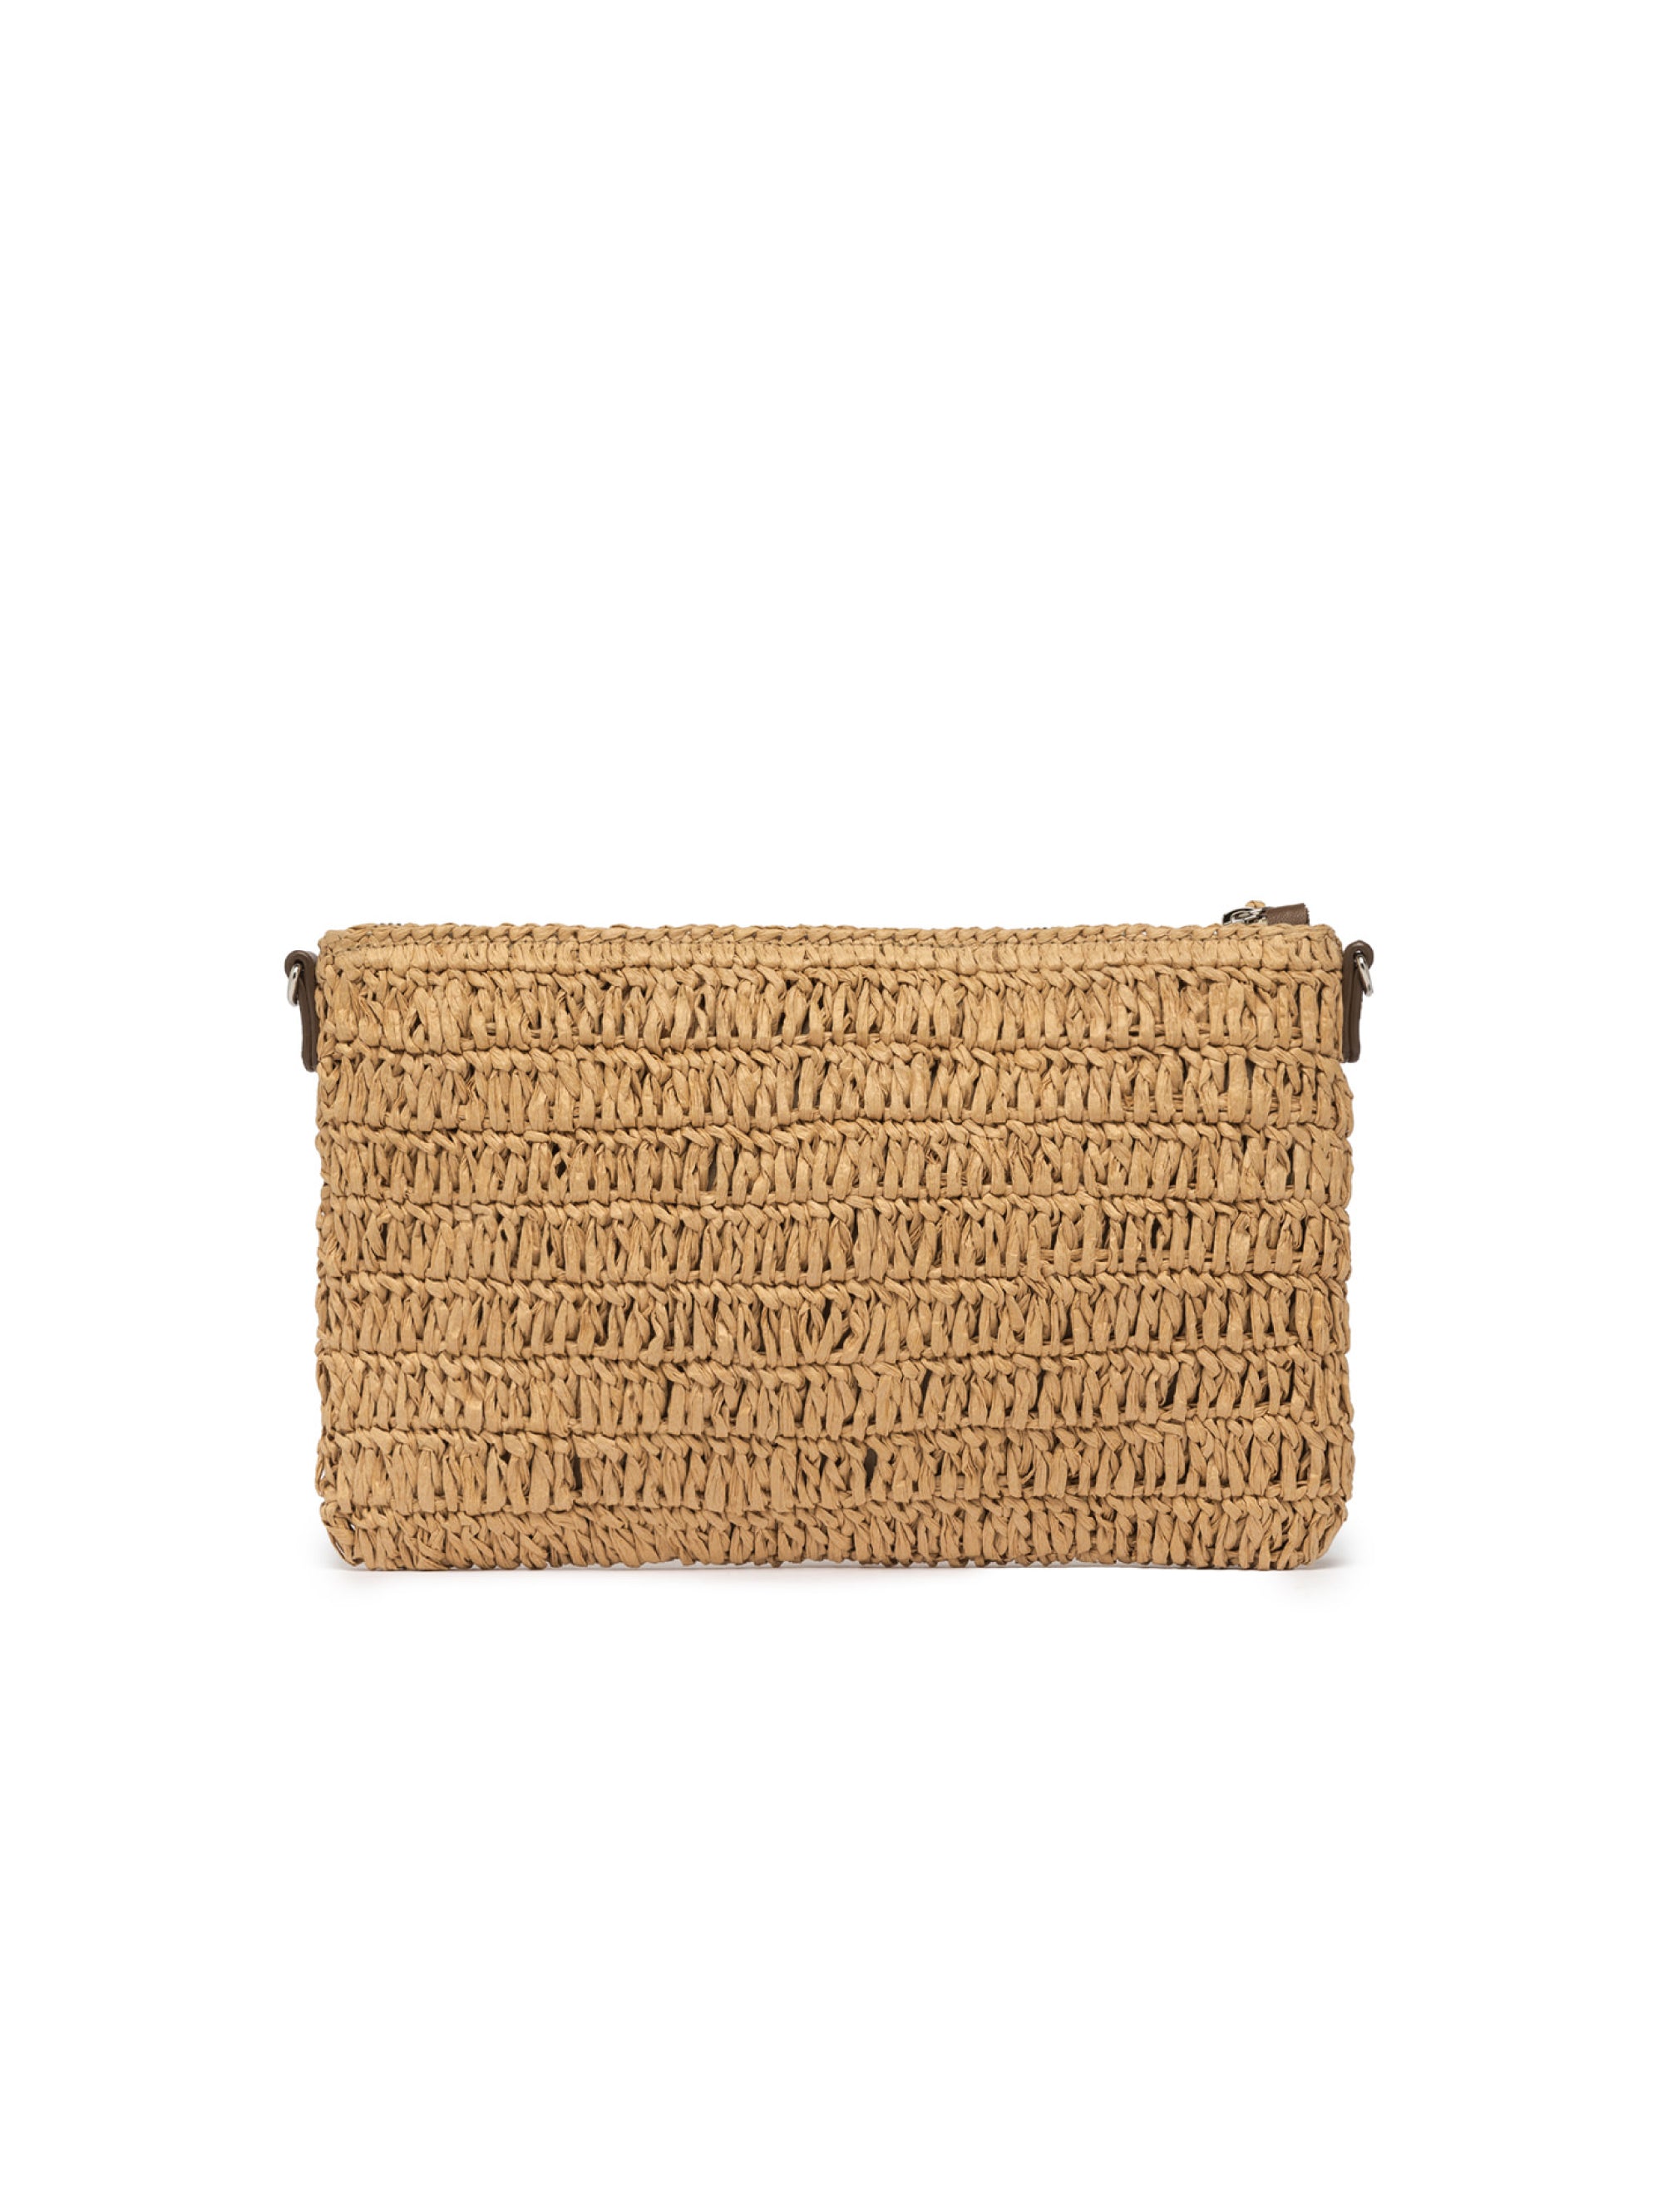 Straw clutch bag with rope crochet workmanship